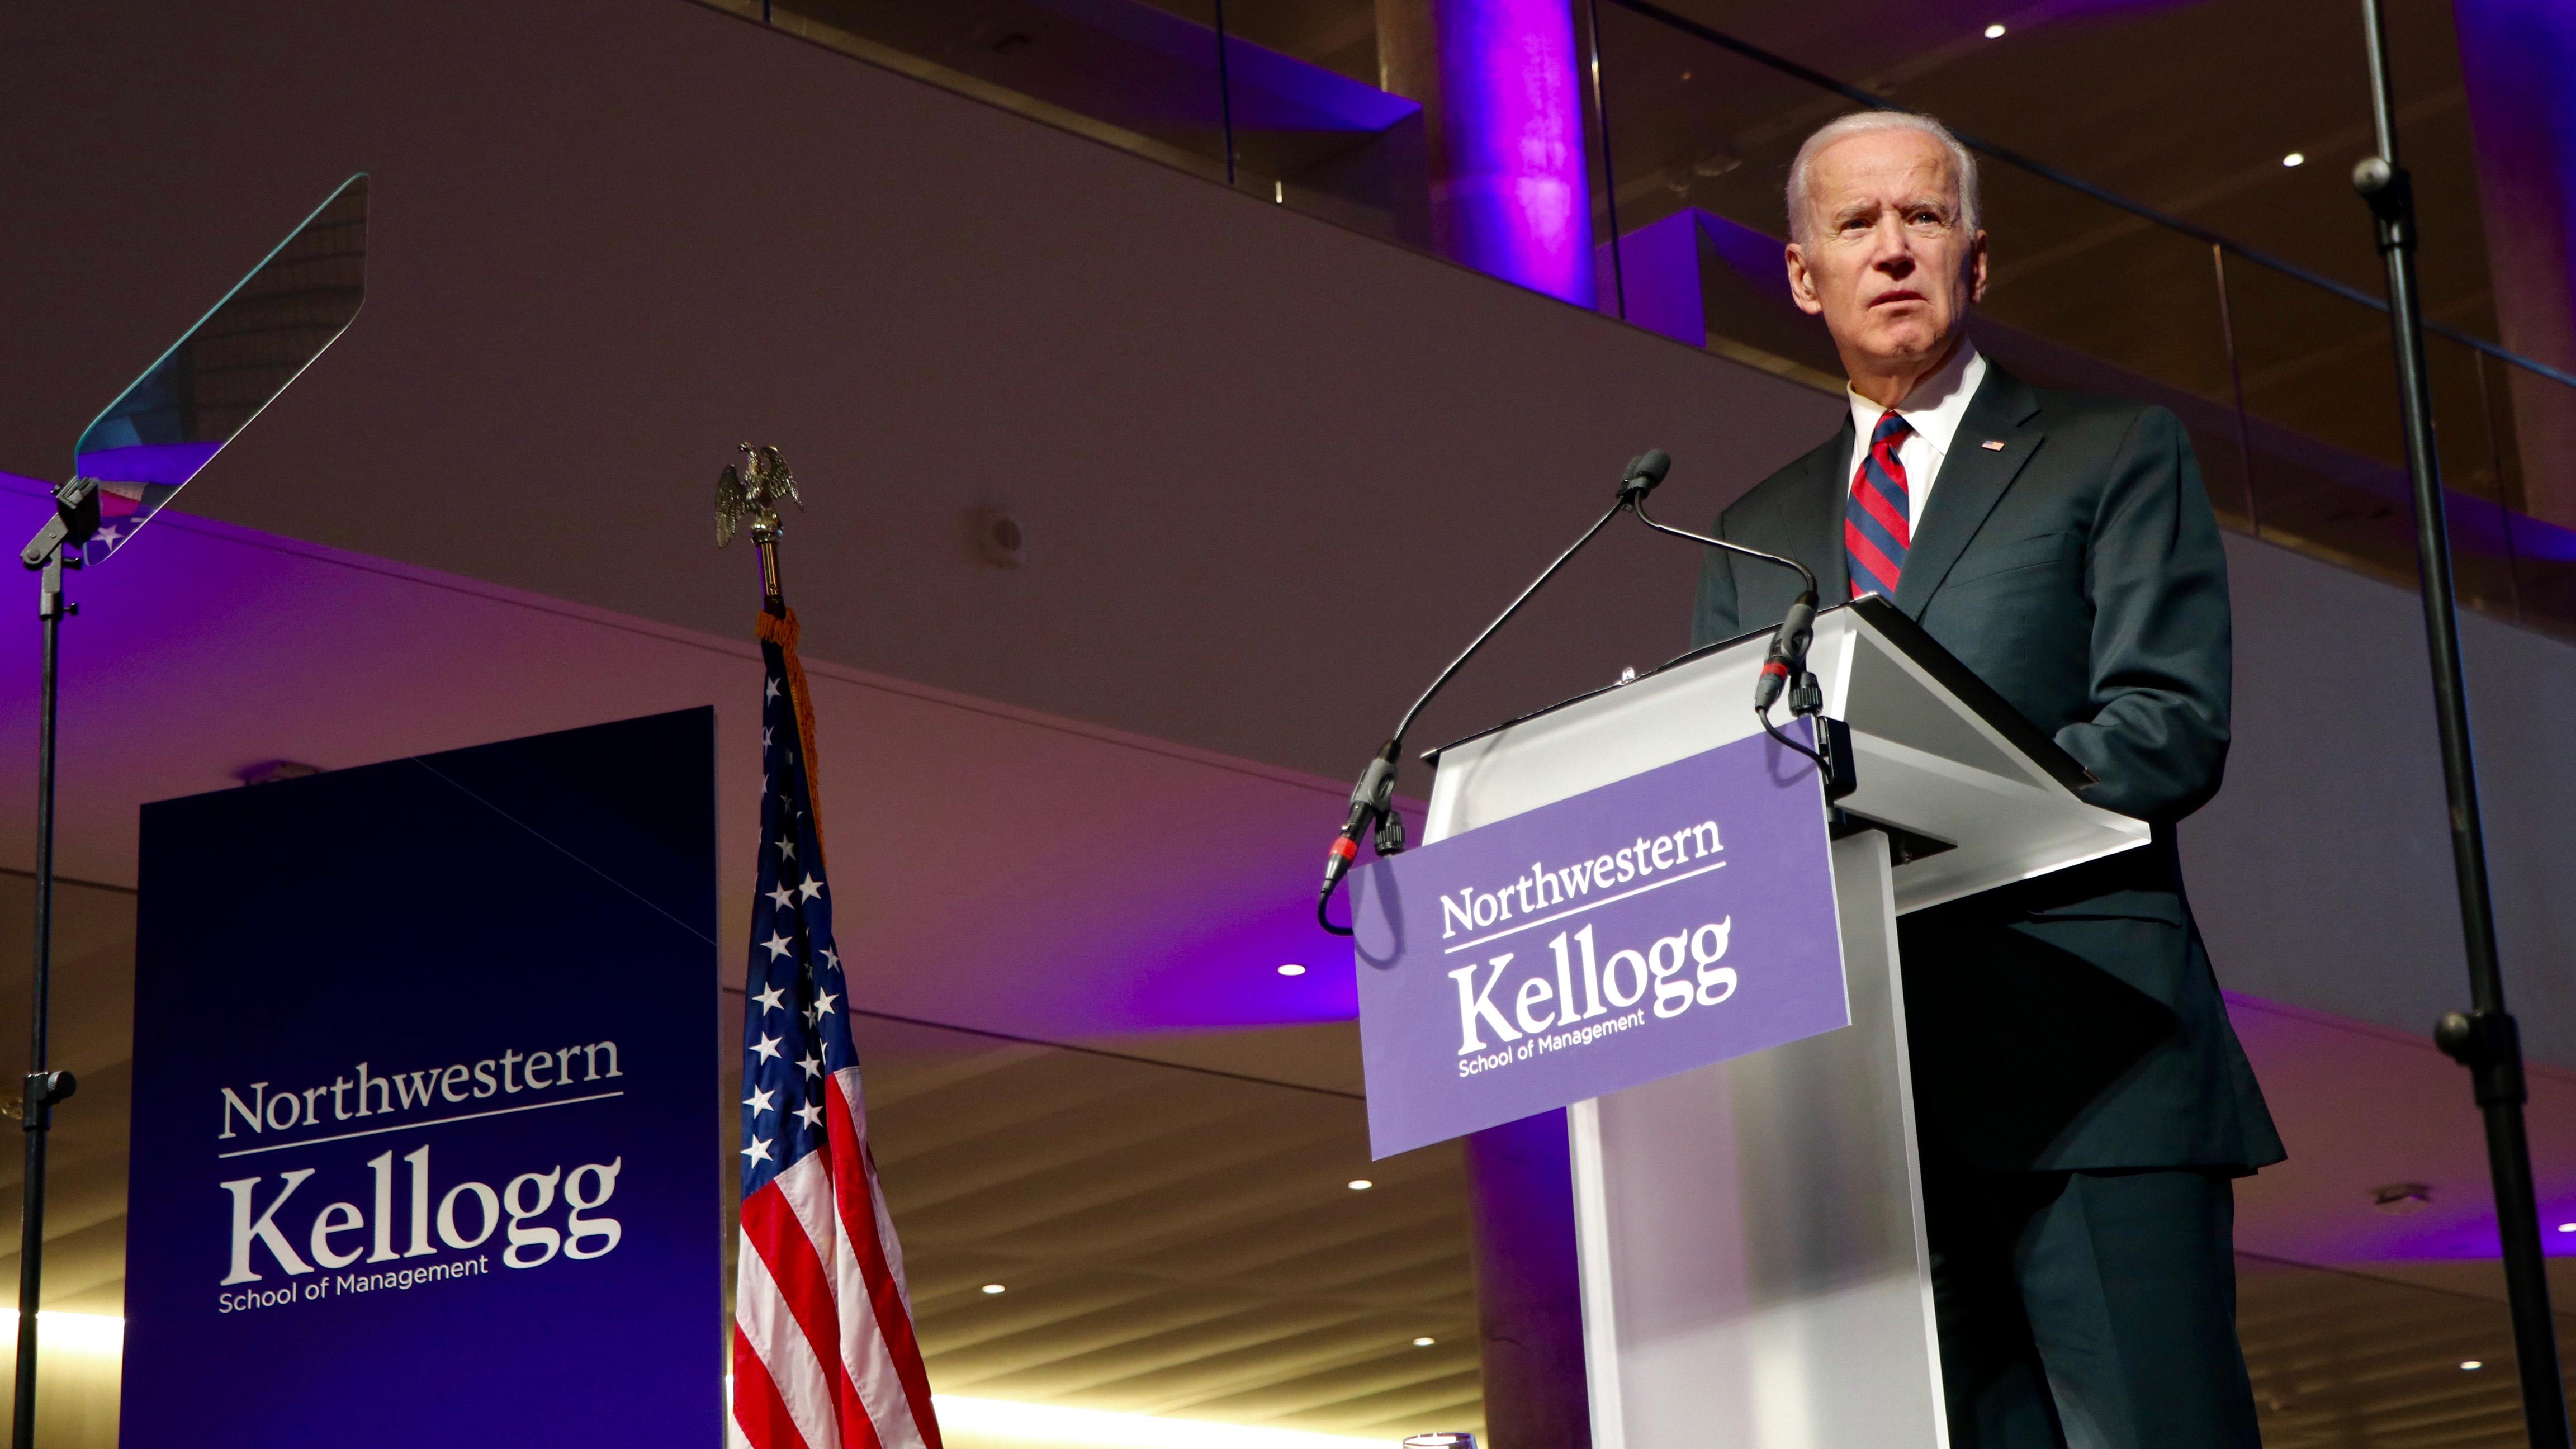 Biden touched on a range of issues Friday, including immigration, gender equality and education. (Evan Garcia / Chicago Tonight)